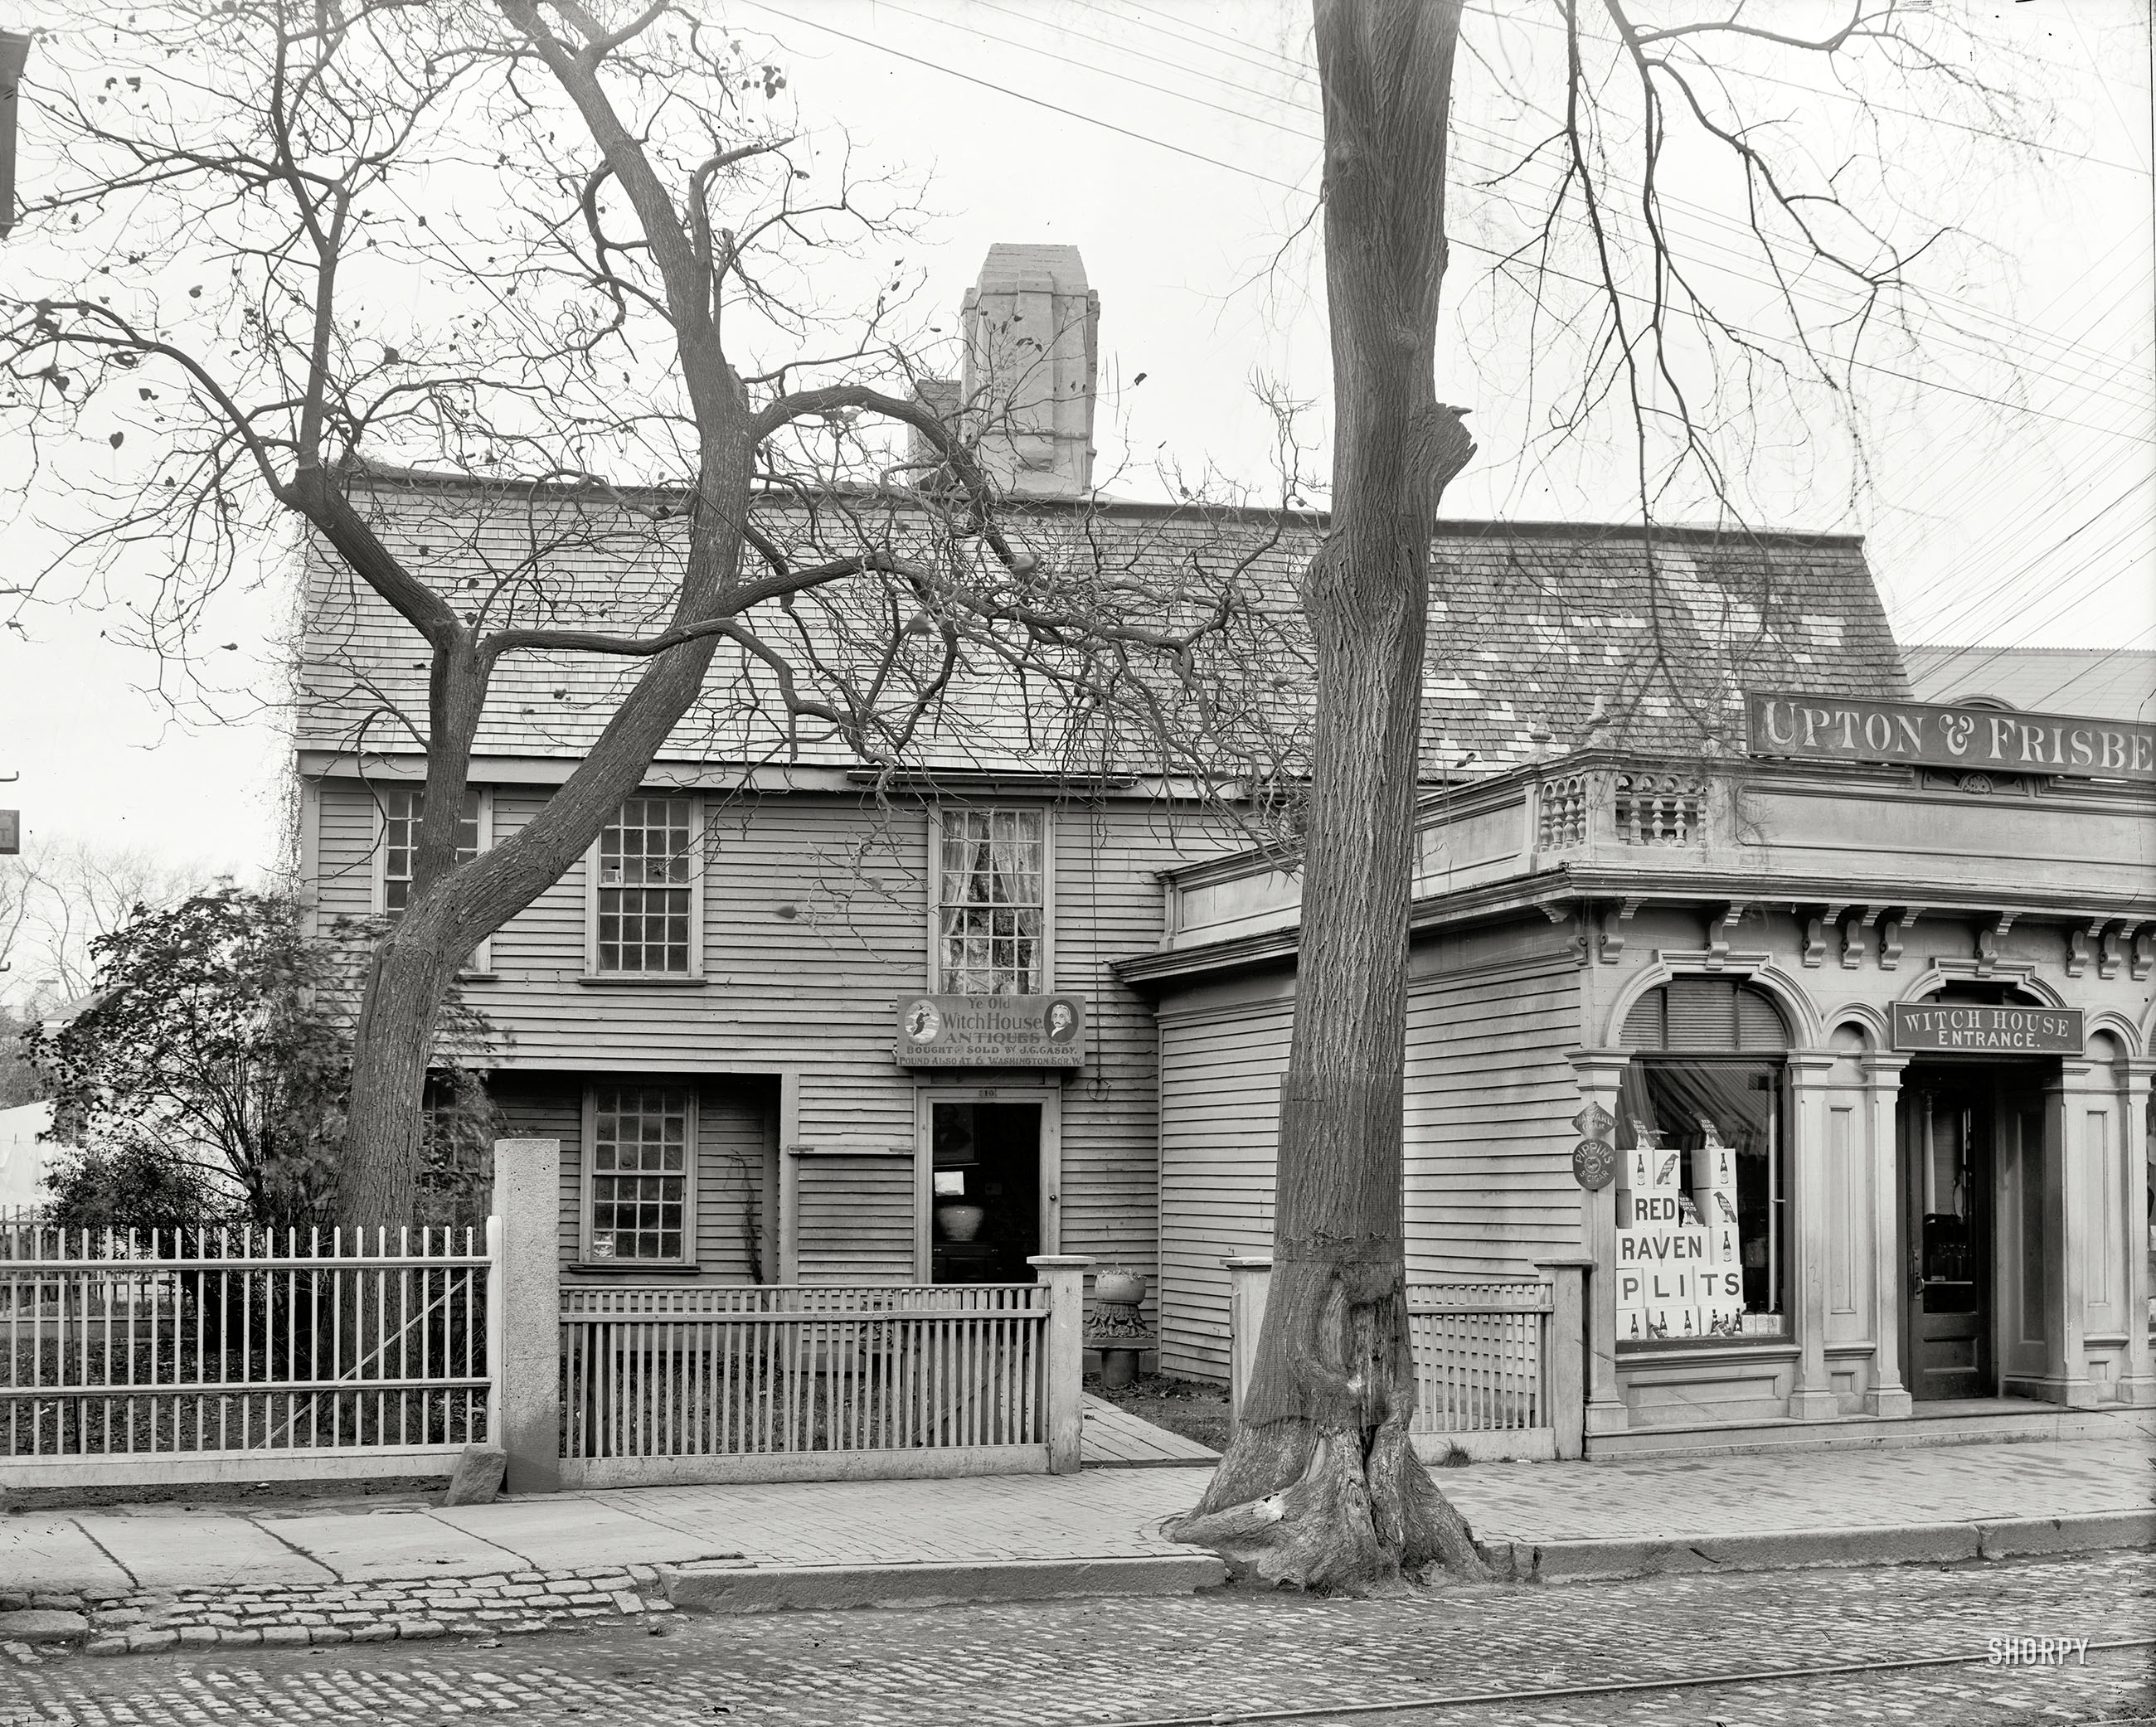 Salem, Massachusetts, circa 1901. "The Witch House." One-stop shopping for antiques, cigars and spirits of all kinds. 8x10 glass negative. View full size.